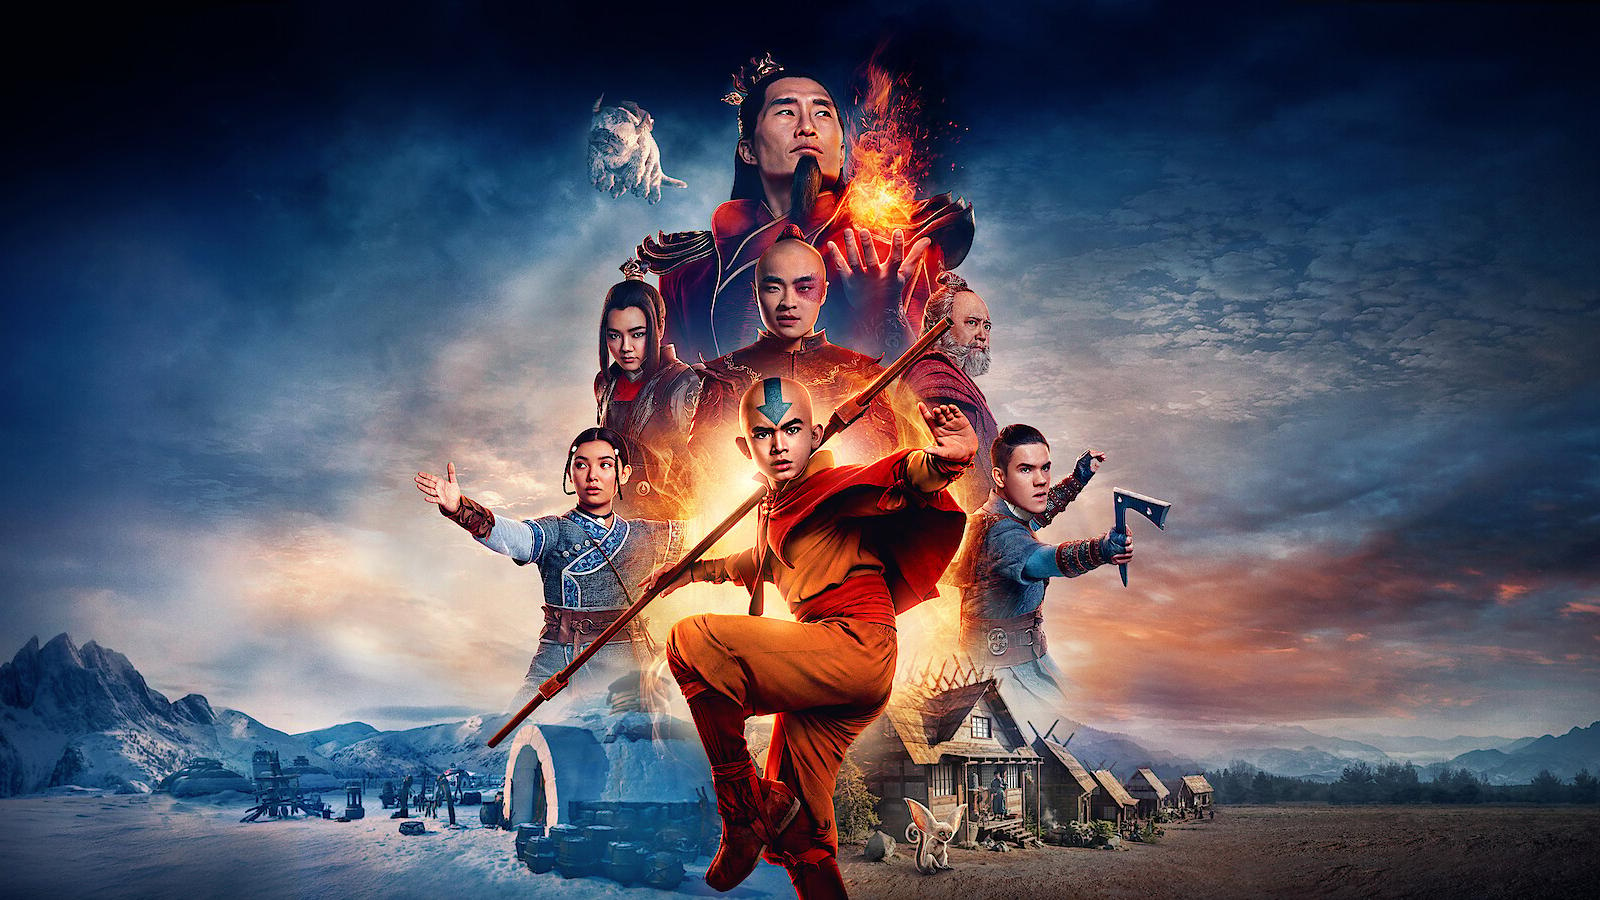 Promotional artwork for Netflix's Avatar: The Last Airbender